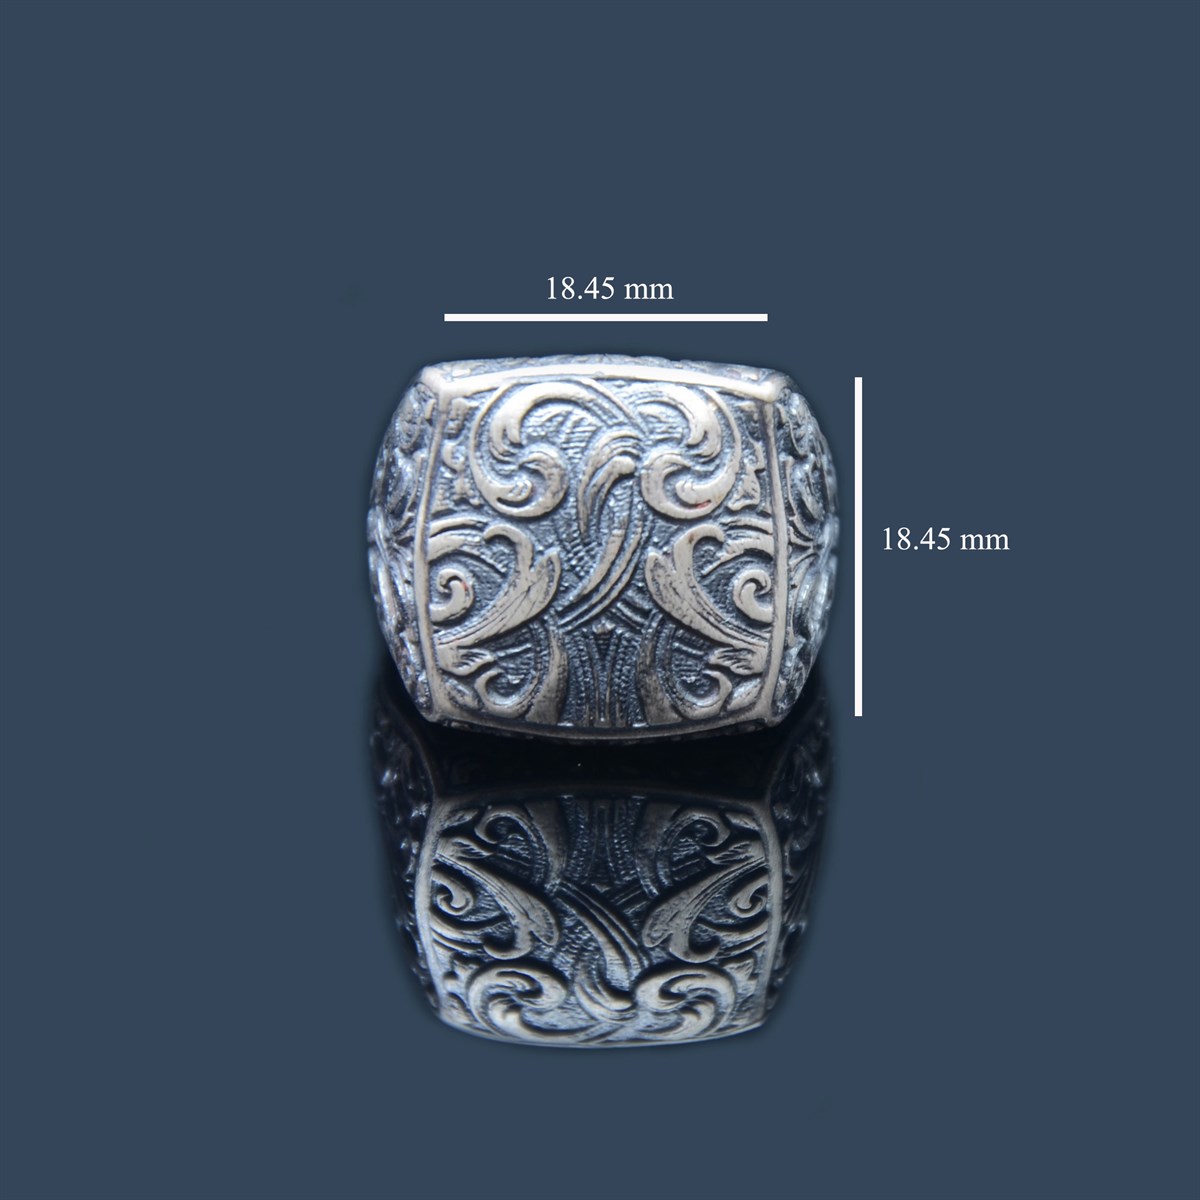 erkek gümüş yüzük, gümüş yüzük, erkek yüzük, silver ring